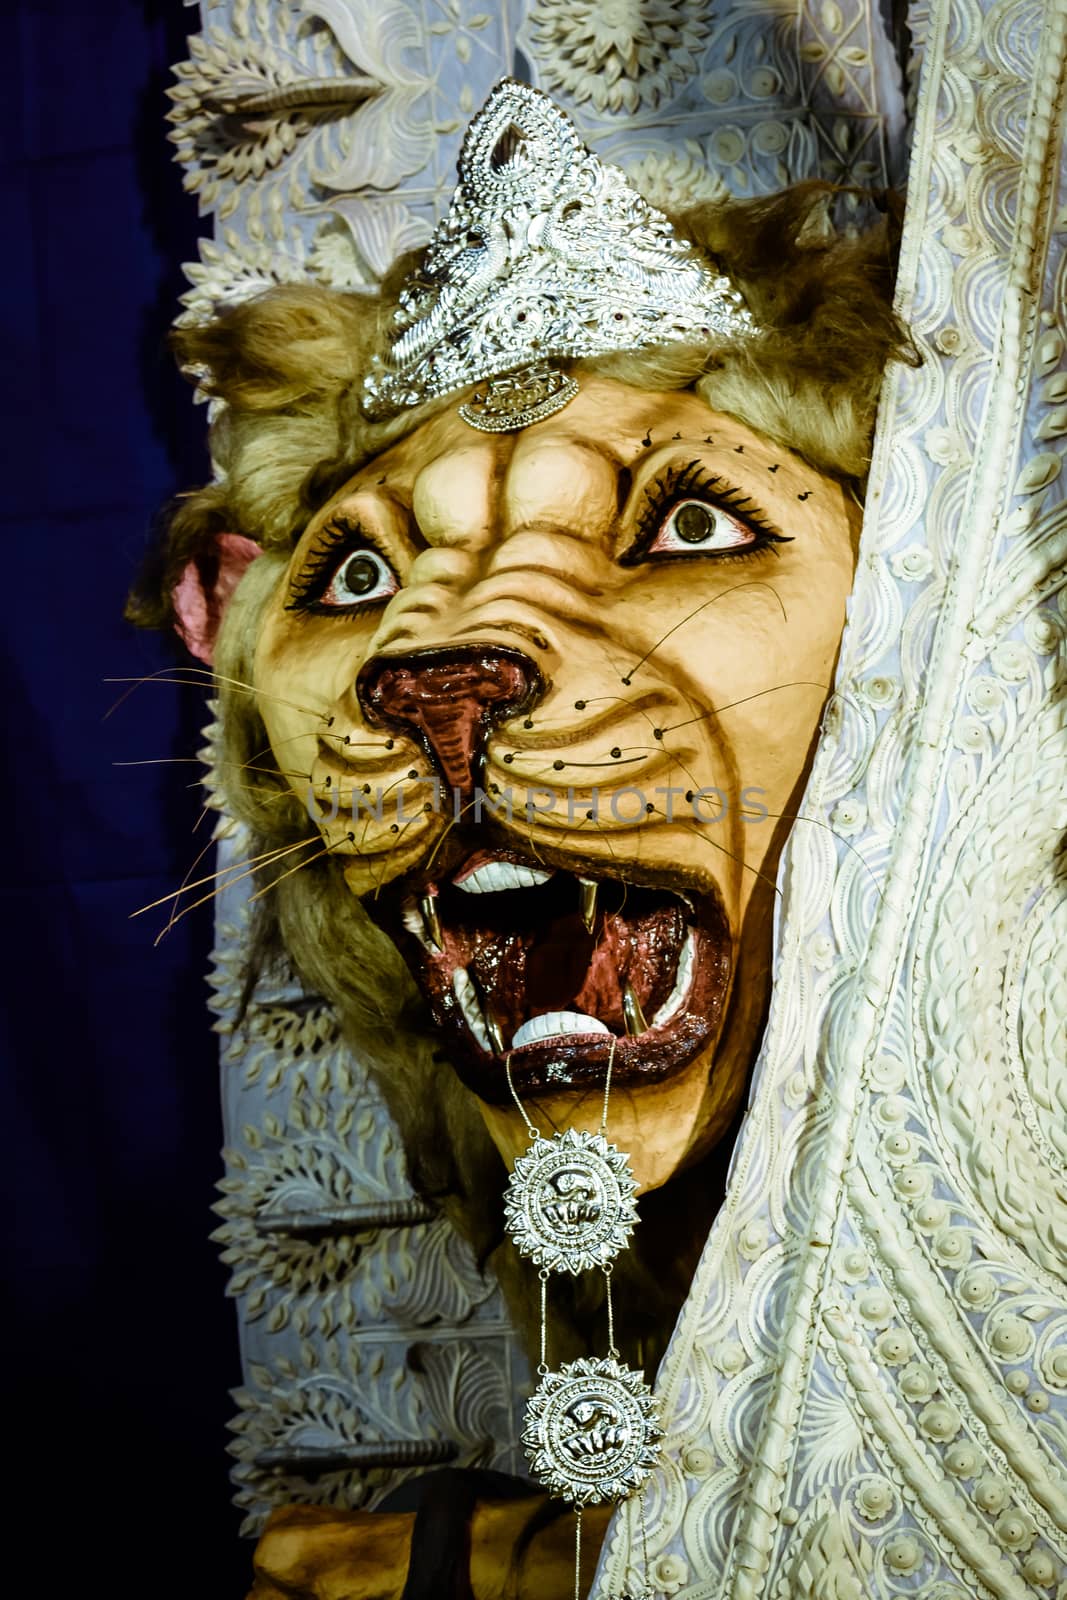 Kolkata India October 2018 - Close up portrait of Screaming horror face of King Bengal Tiger Head. Ghost cruel, Scary halloween shot in Durga Puja festival. A Lion symbolizes power to destroy evil. by sudiptabhowmick